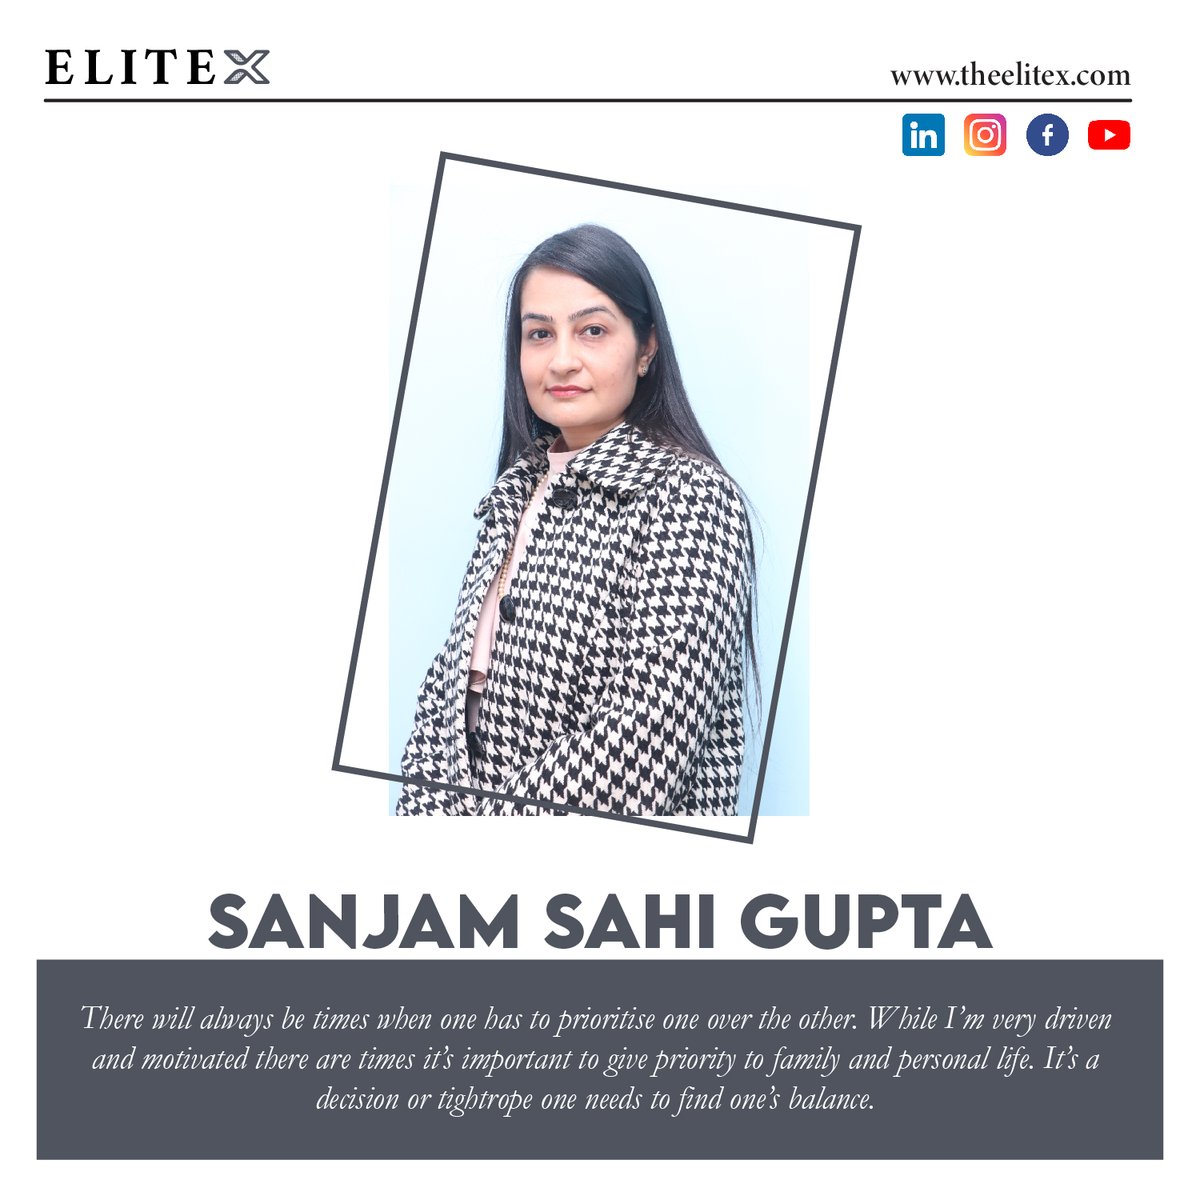 I've been featured in EliteX's magazine where the have been celebrating Impactful Women Entrepreneurs: Making a Difference.

You can access it through any of the links below:
🔵 Web link: lnkd.in/dbhGXZte 
🔵 Profile link: lnkd.in/dQwTVGYb 

#WomenInMaritime